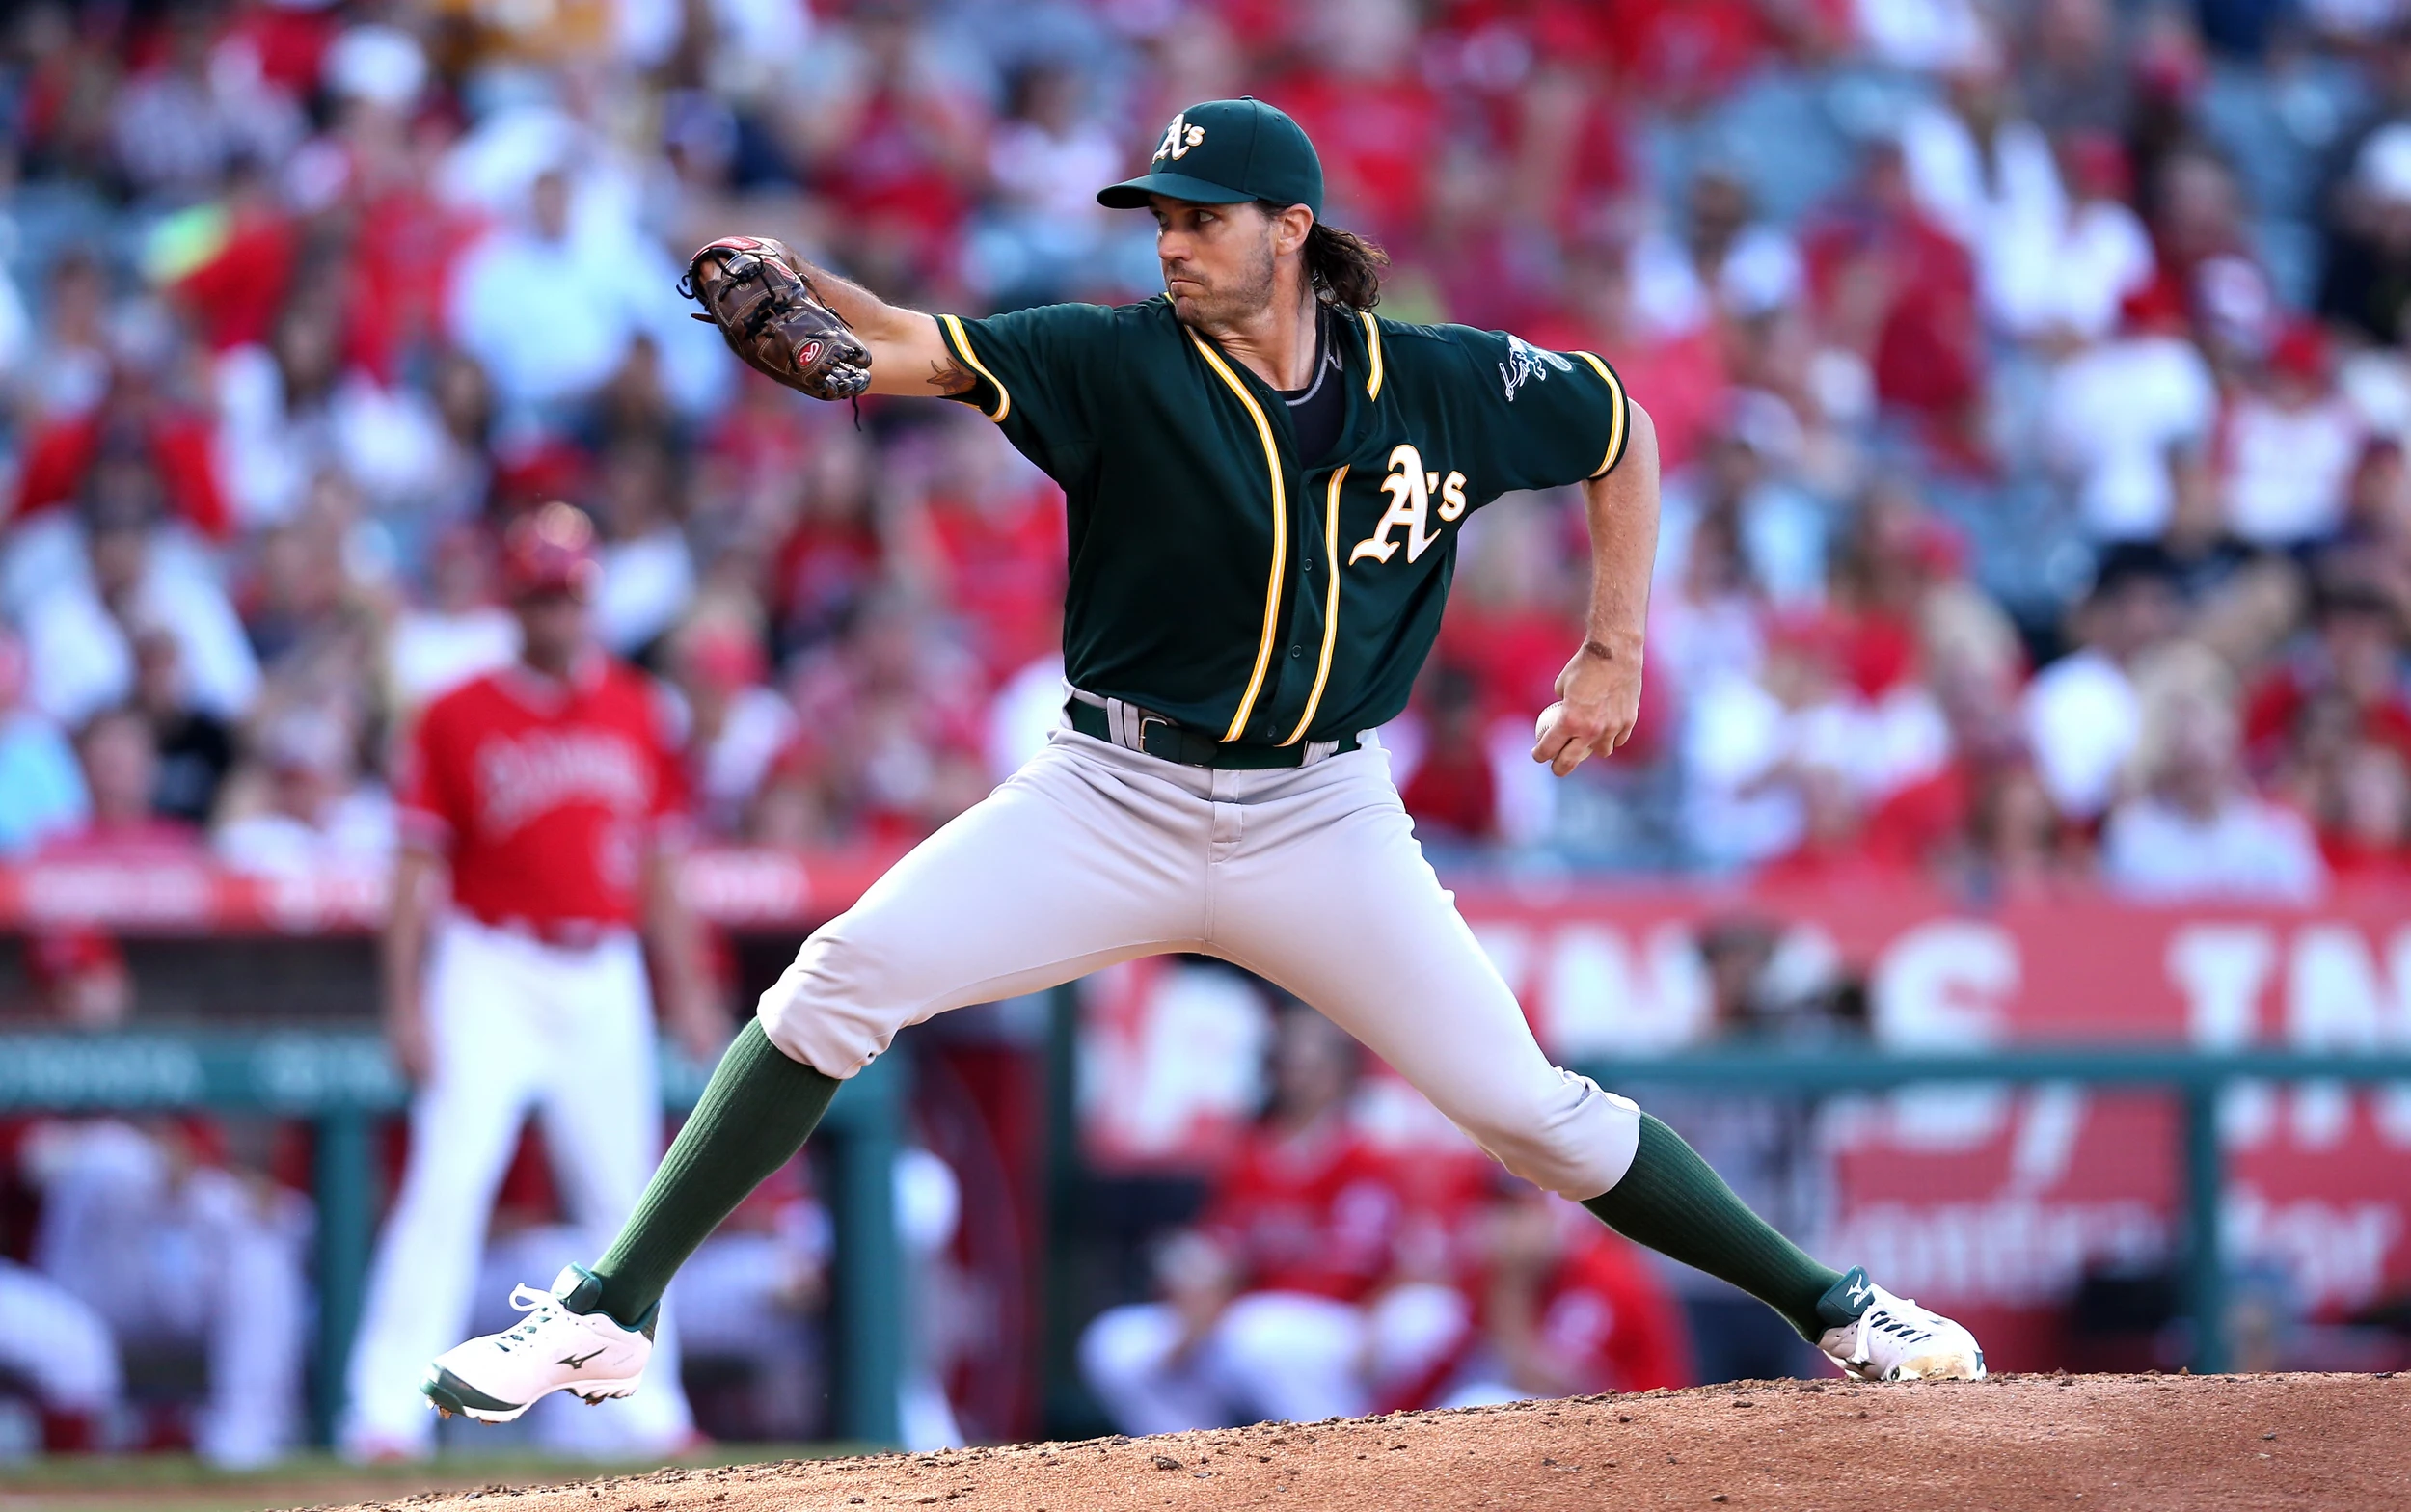 Remembering The Great Barry Zito